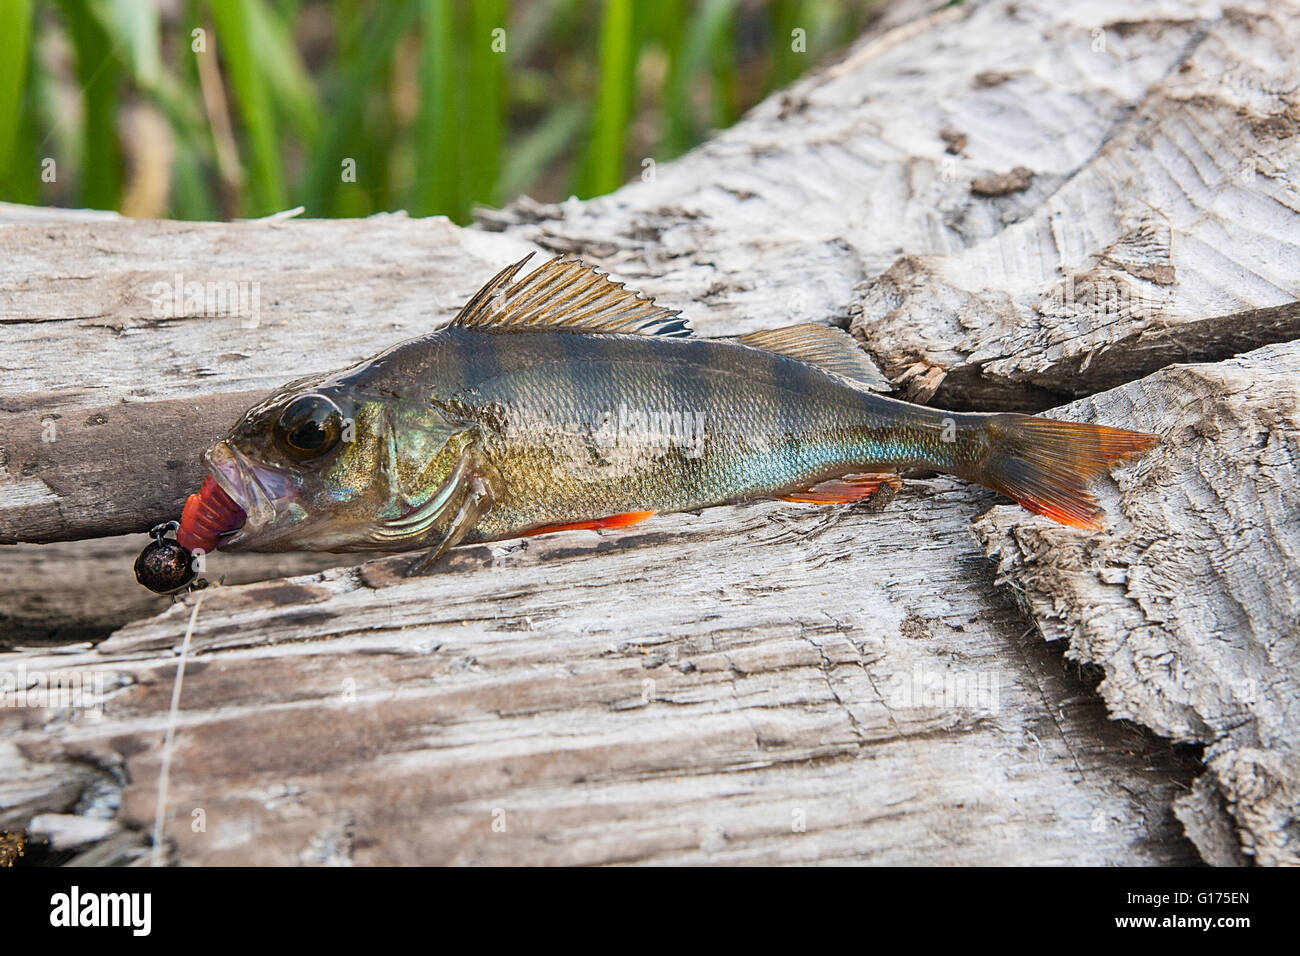 Perch fish just taken from the water on natural background. Perch fish with silicon bait. Stock Photo